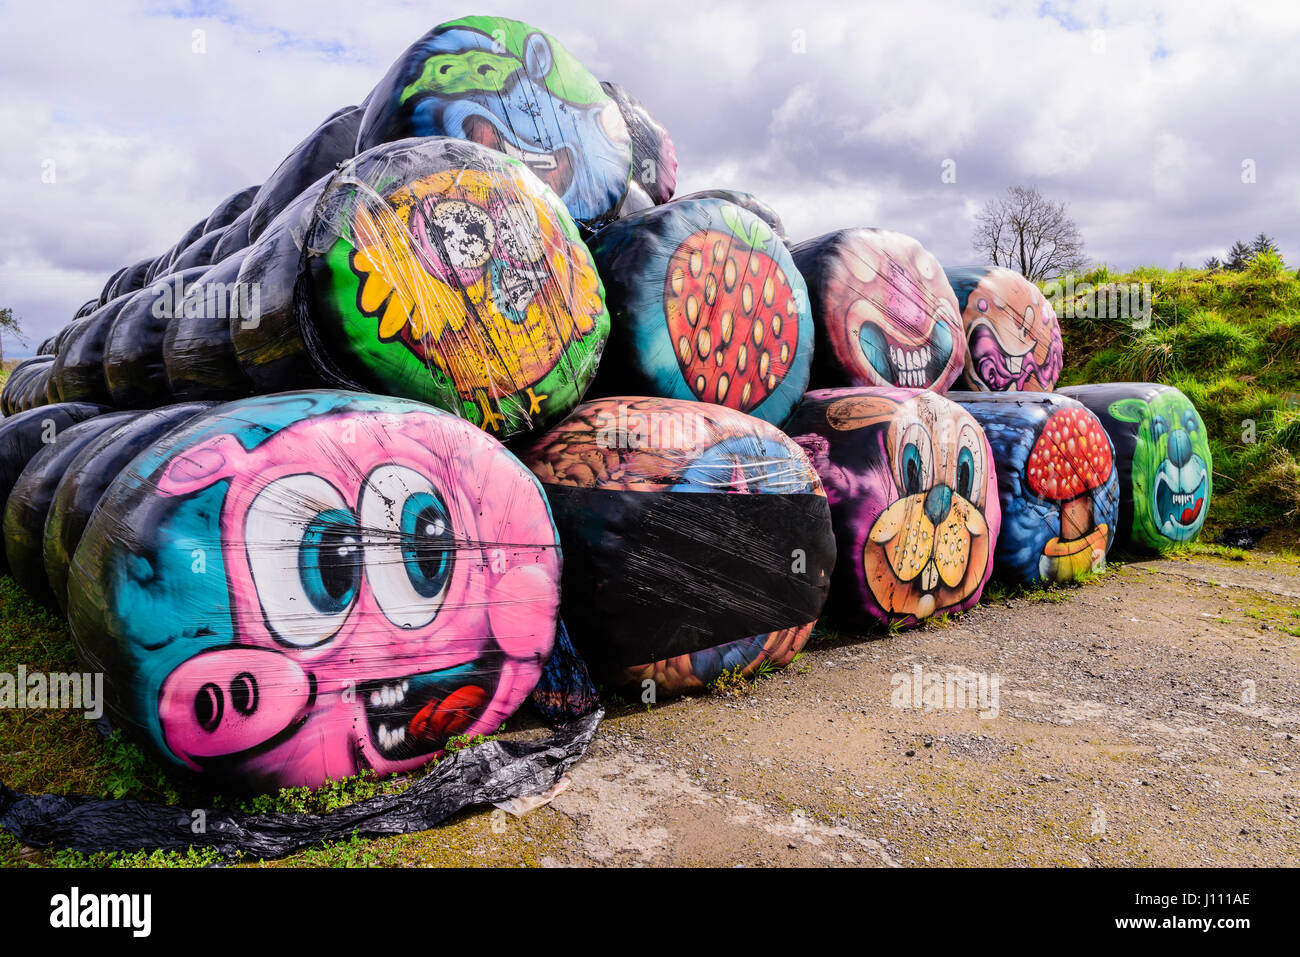 Haybales stacked at the side of a road with various colourful faces and objects painted on them. Stock Photo